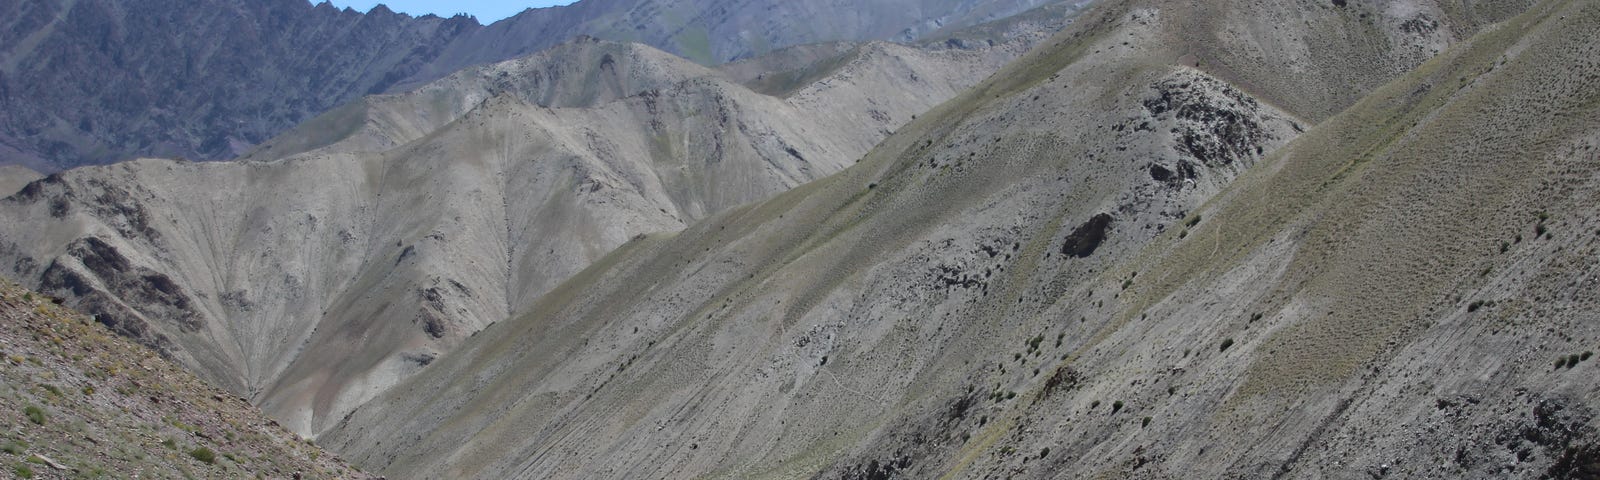 A group of pack horses on a dusty path in a dry, treeless mountain range